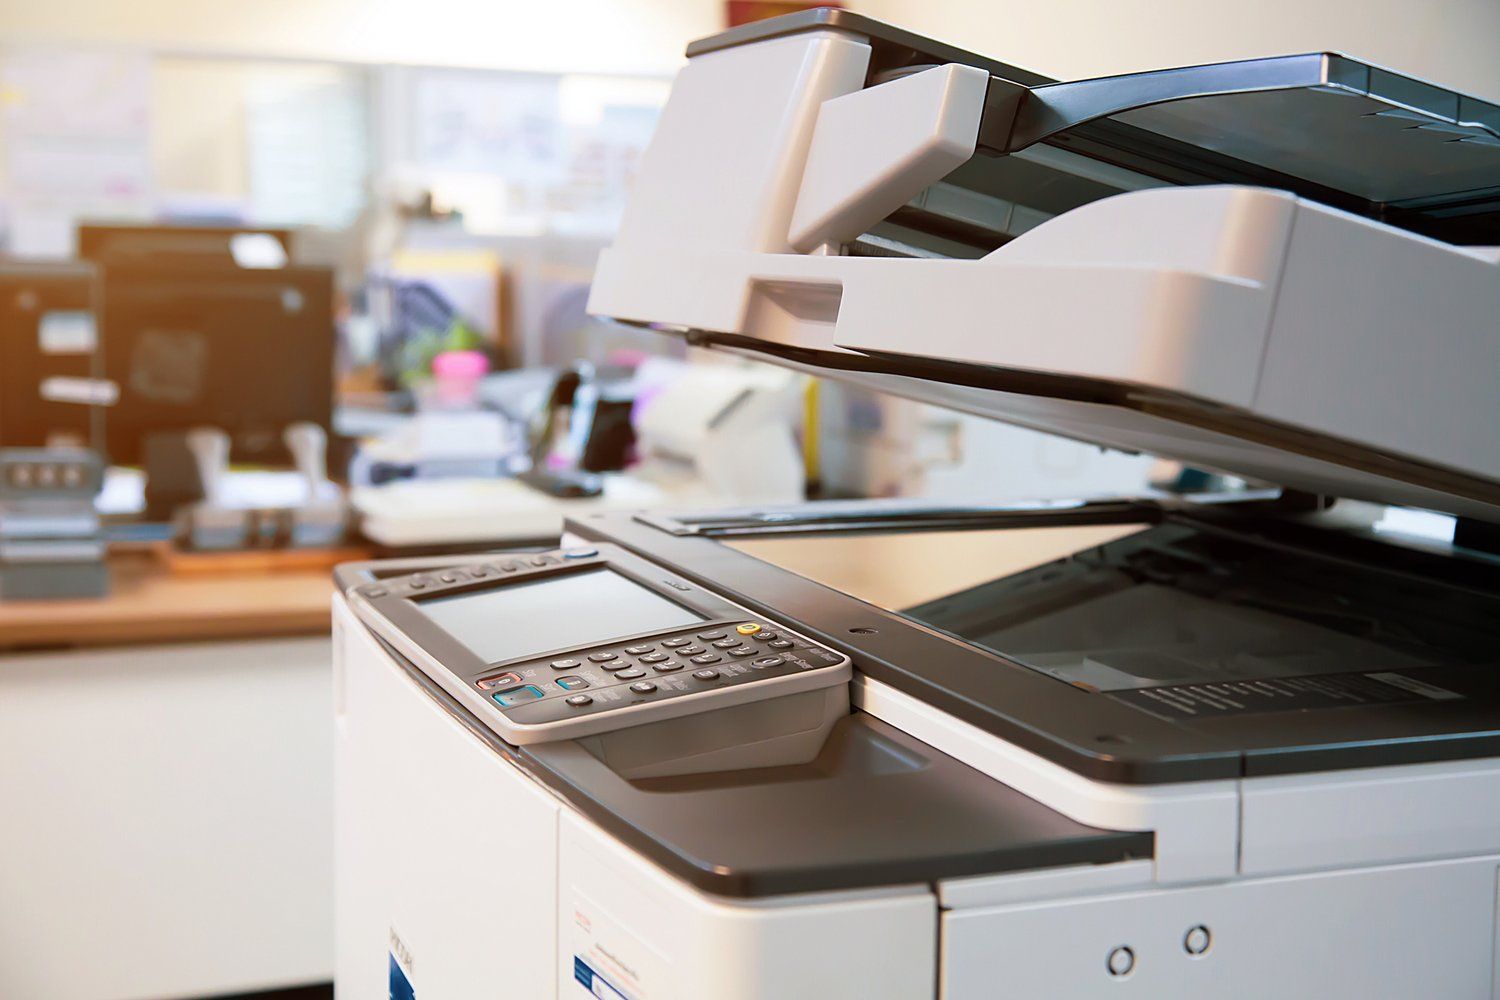 #1 Germiest Spot in Your Office is the Photocopier